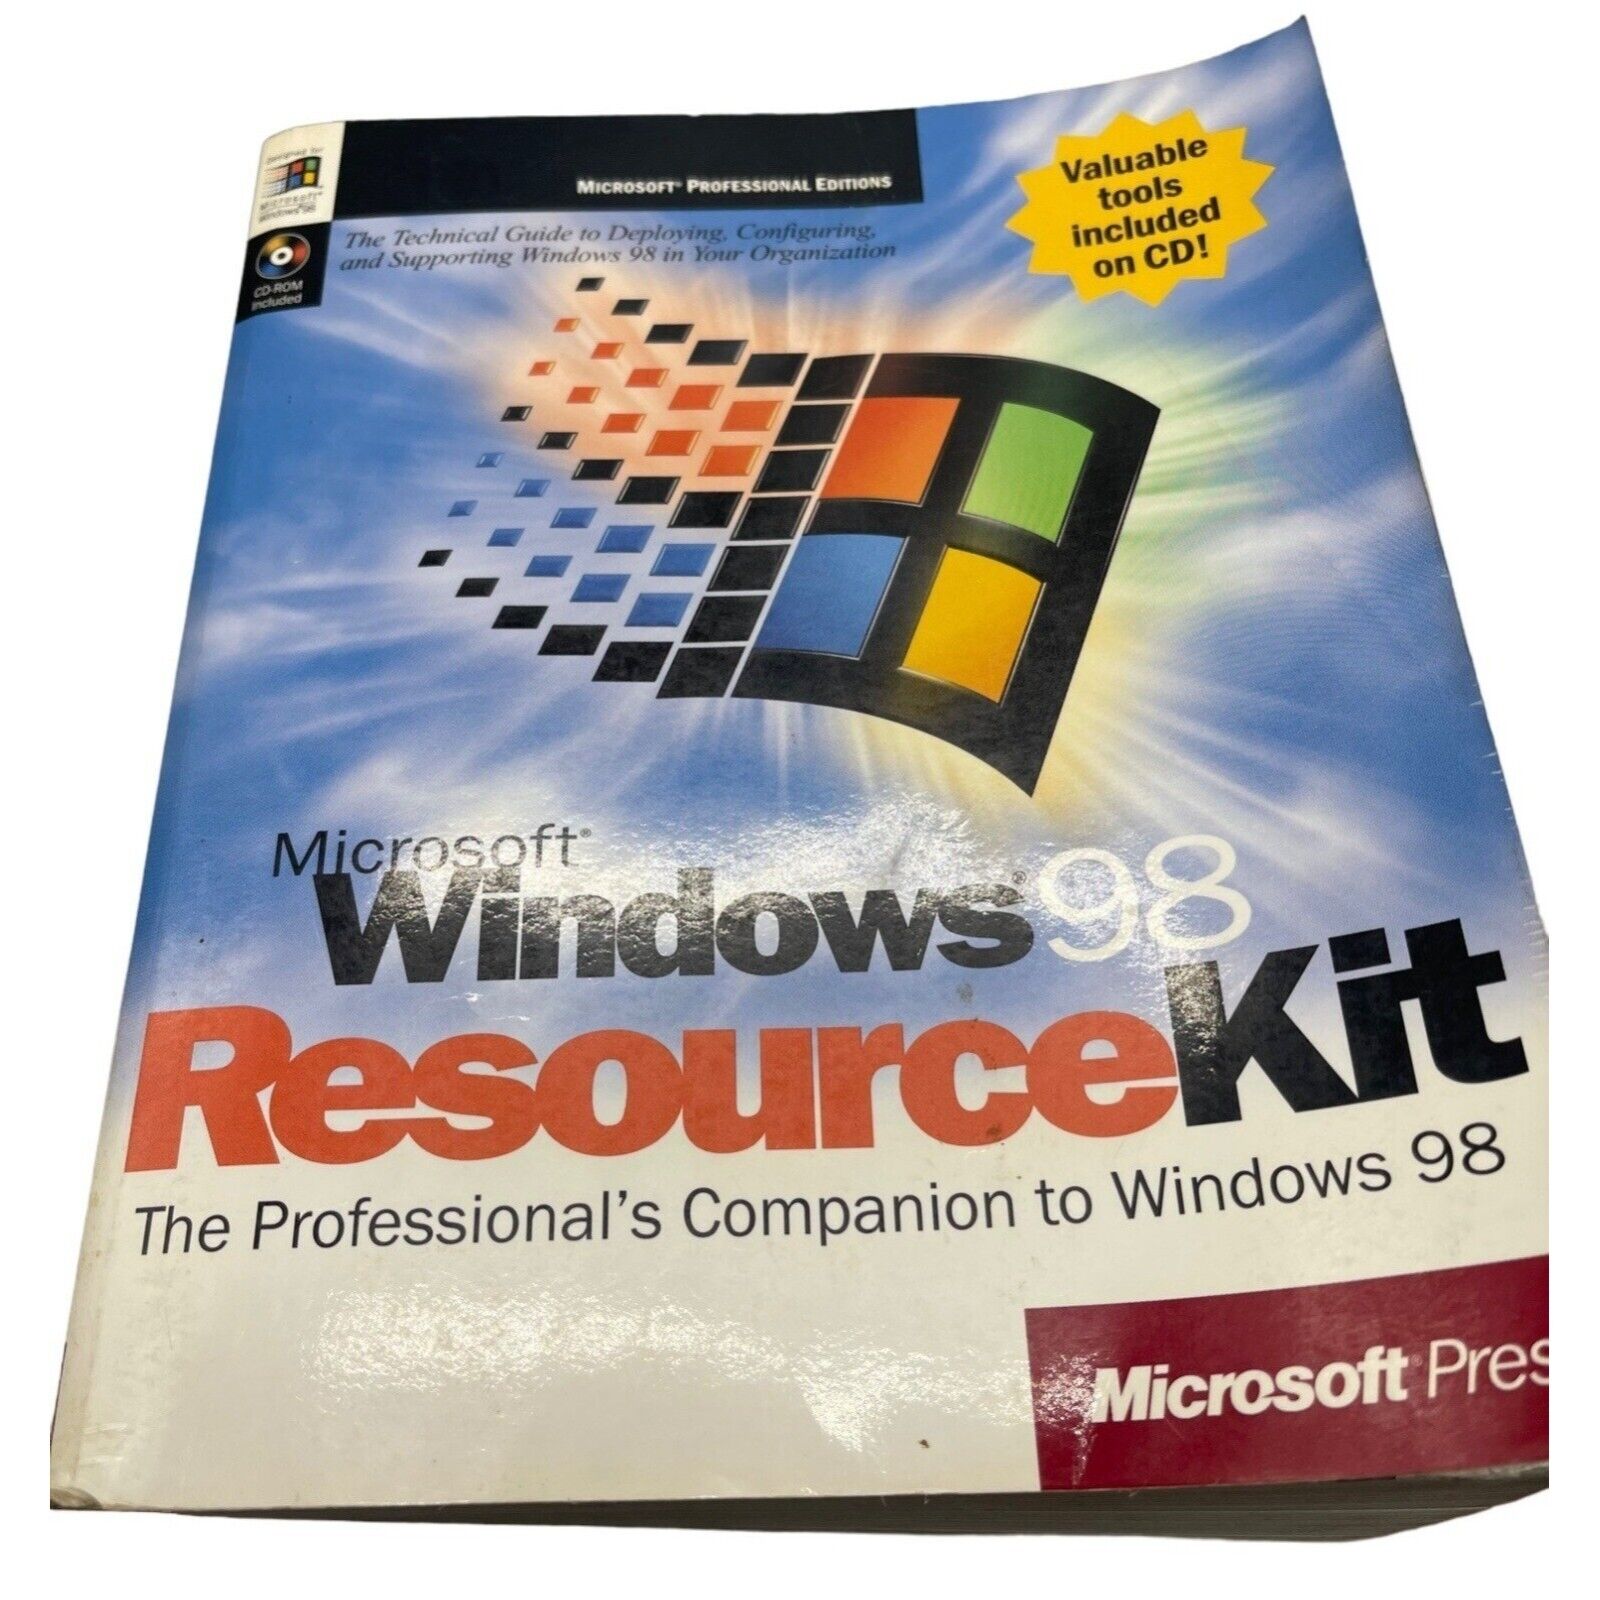 Microsoft windows 98 book resource kit copyright 1998 paperback 1766 pages READ